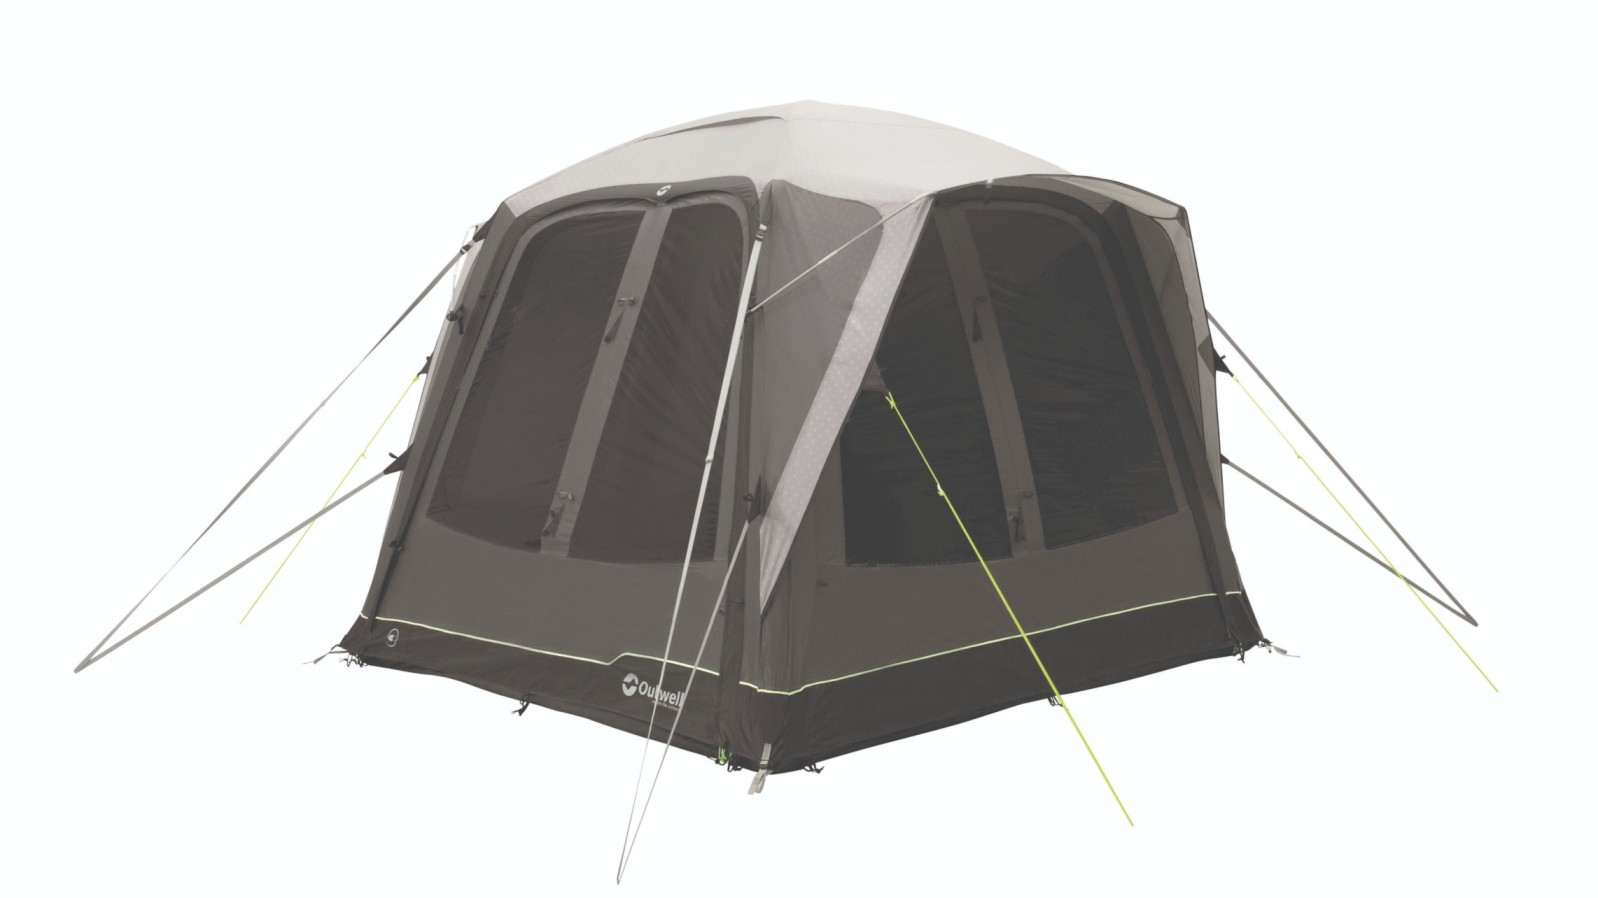 The Outwell Bremburg Air awning